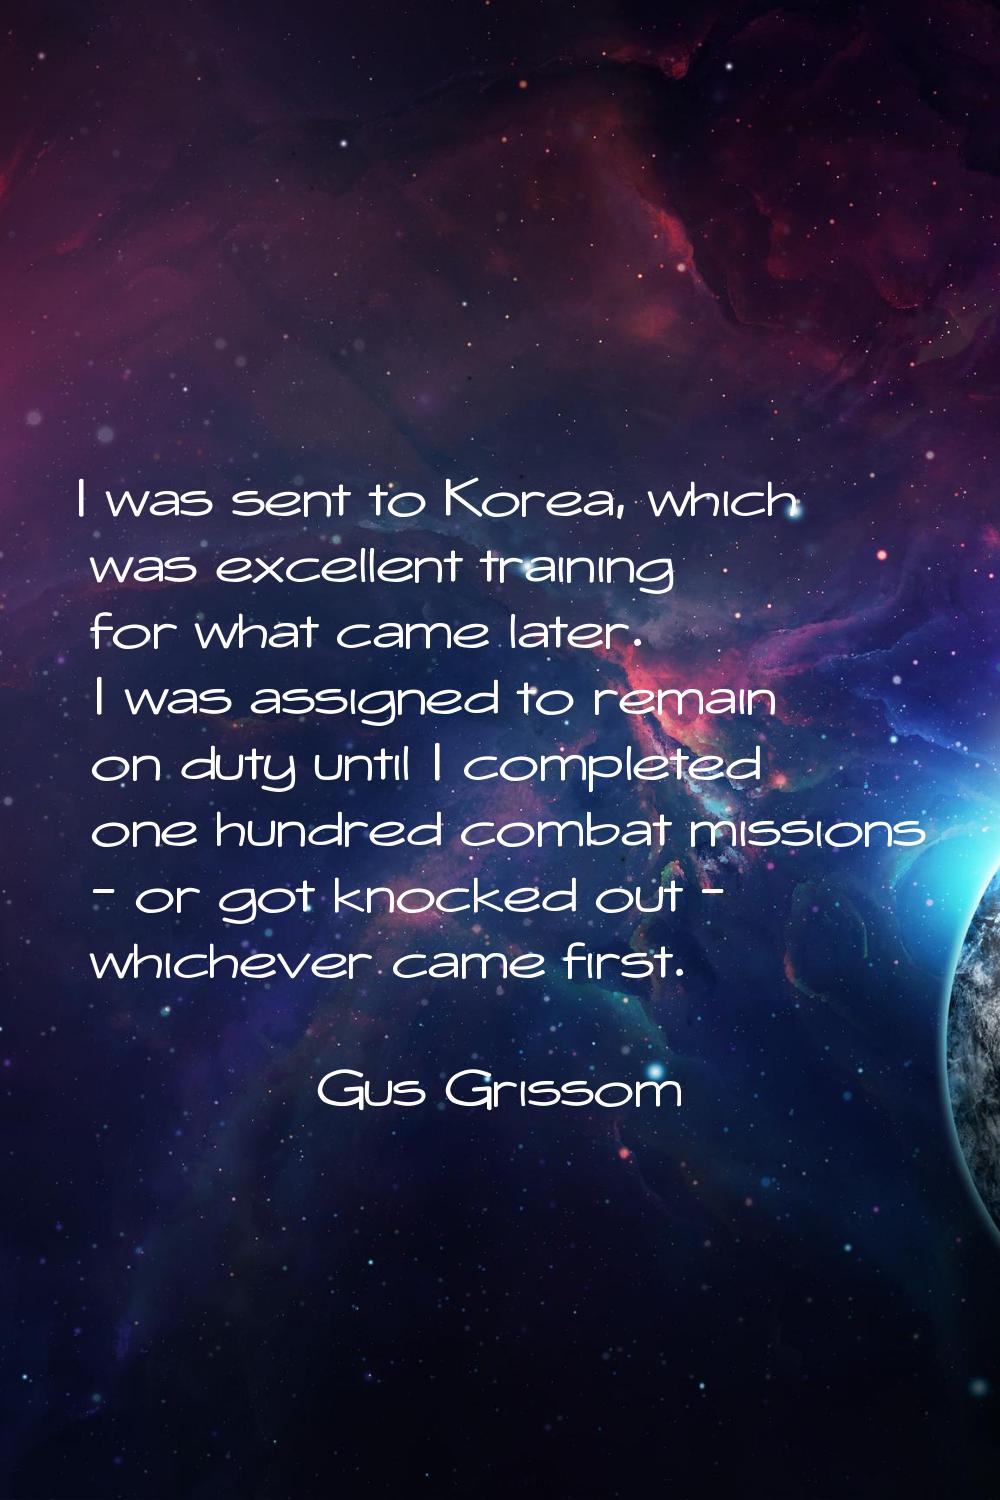 I was sent to Korea, which was excellent training for what came later. I was assigned to remain on 